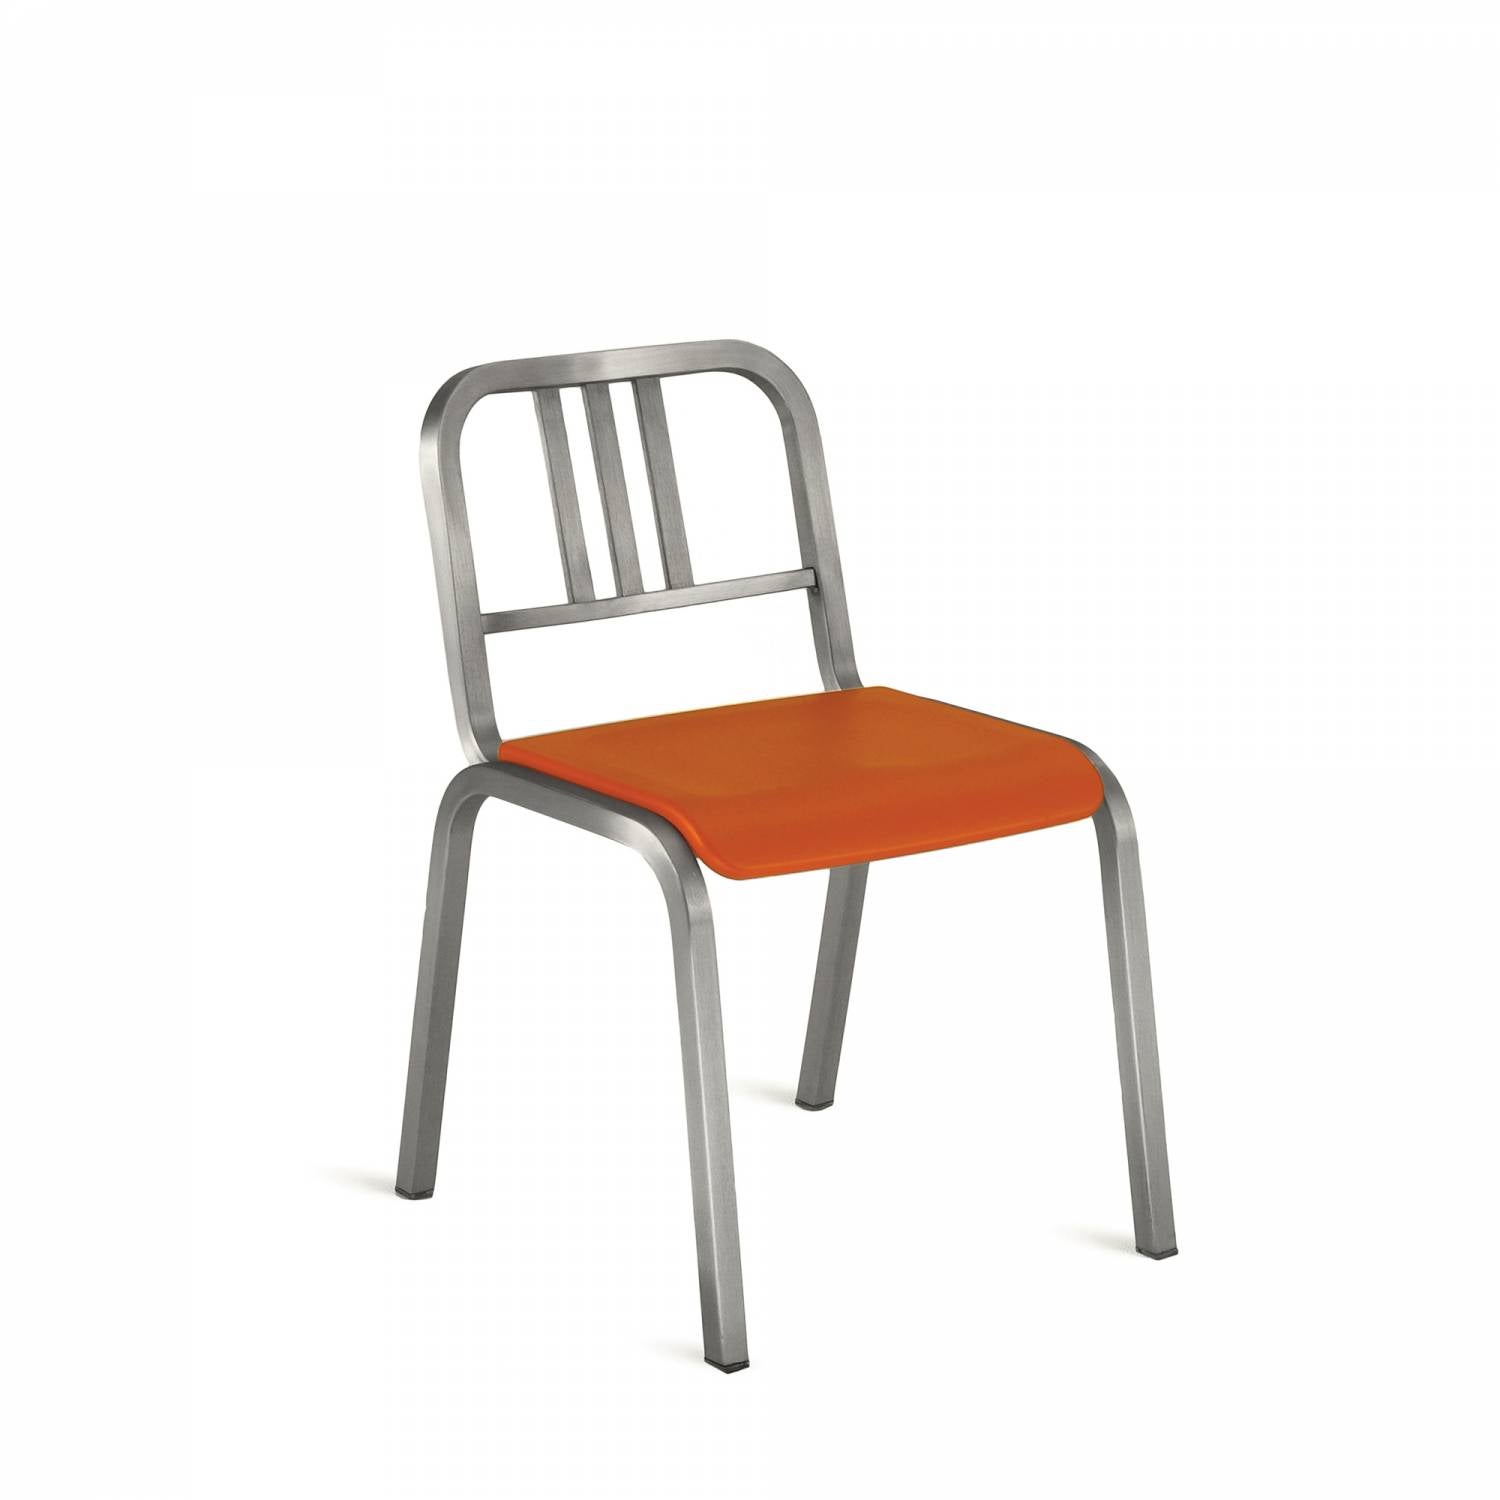 Emeco Nine 0 Chair In Brushed Aluminum With Orange Seat By Ettore